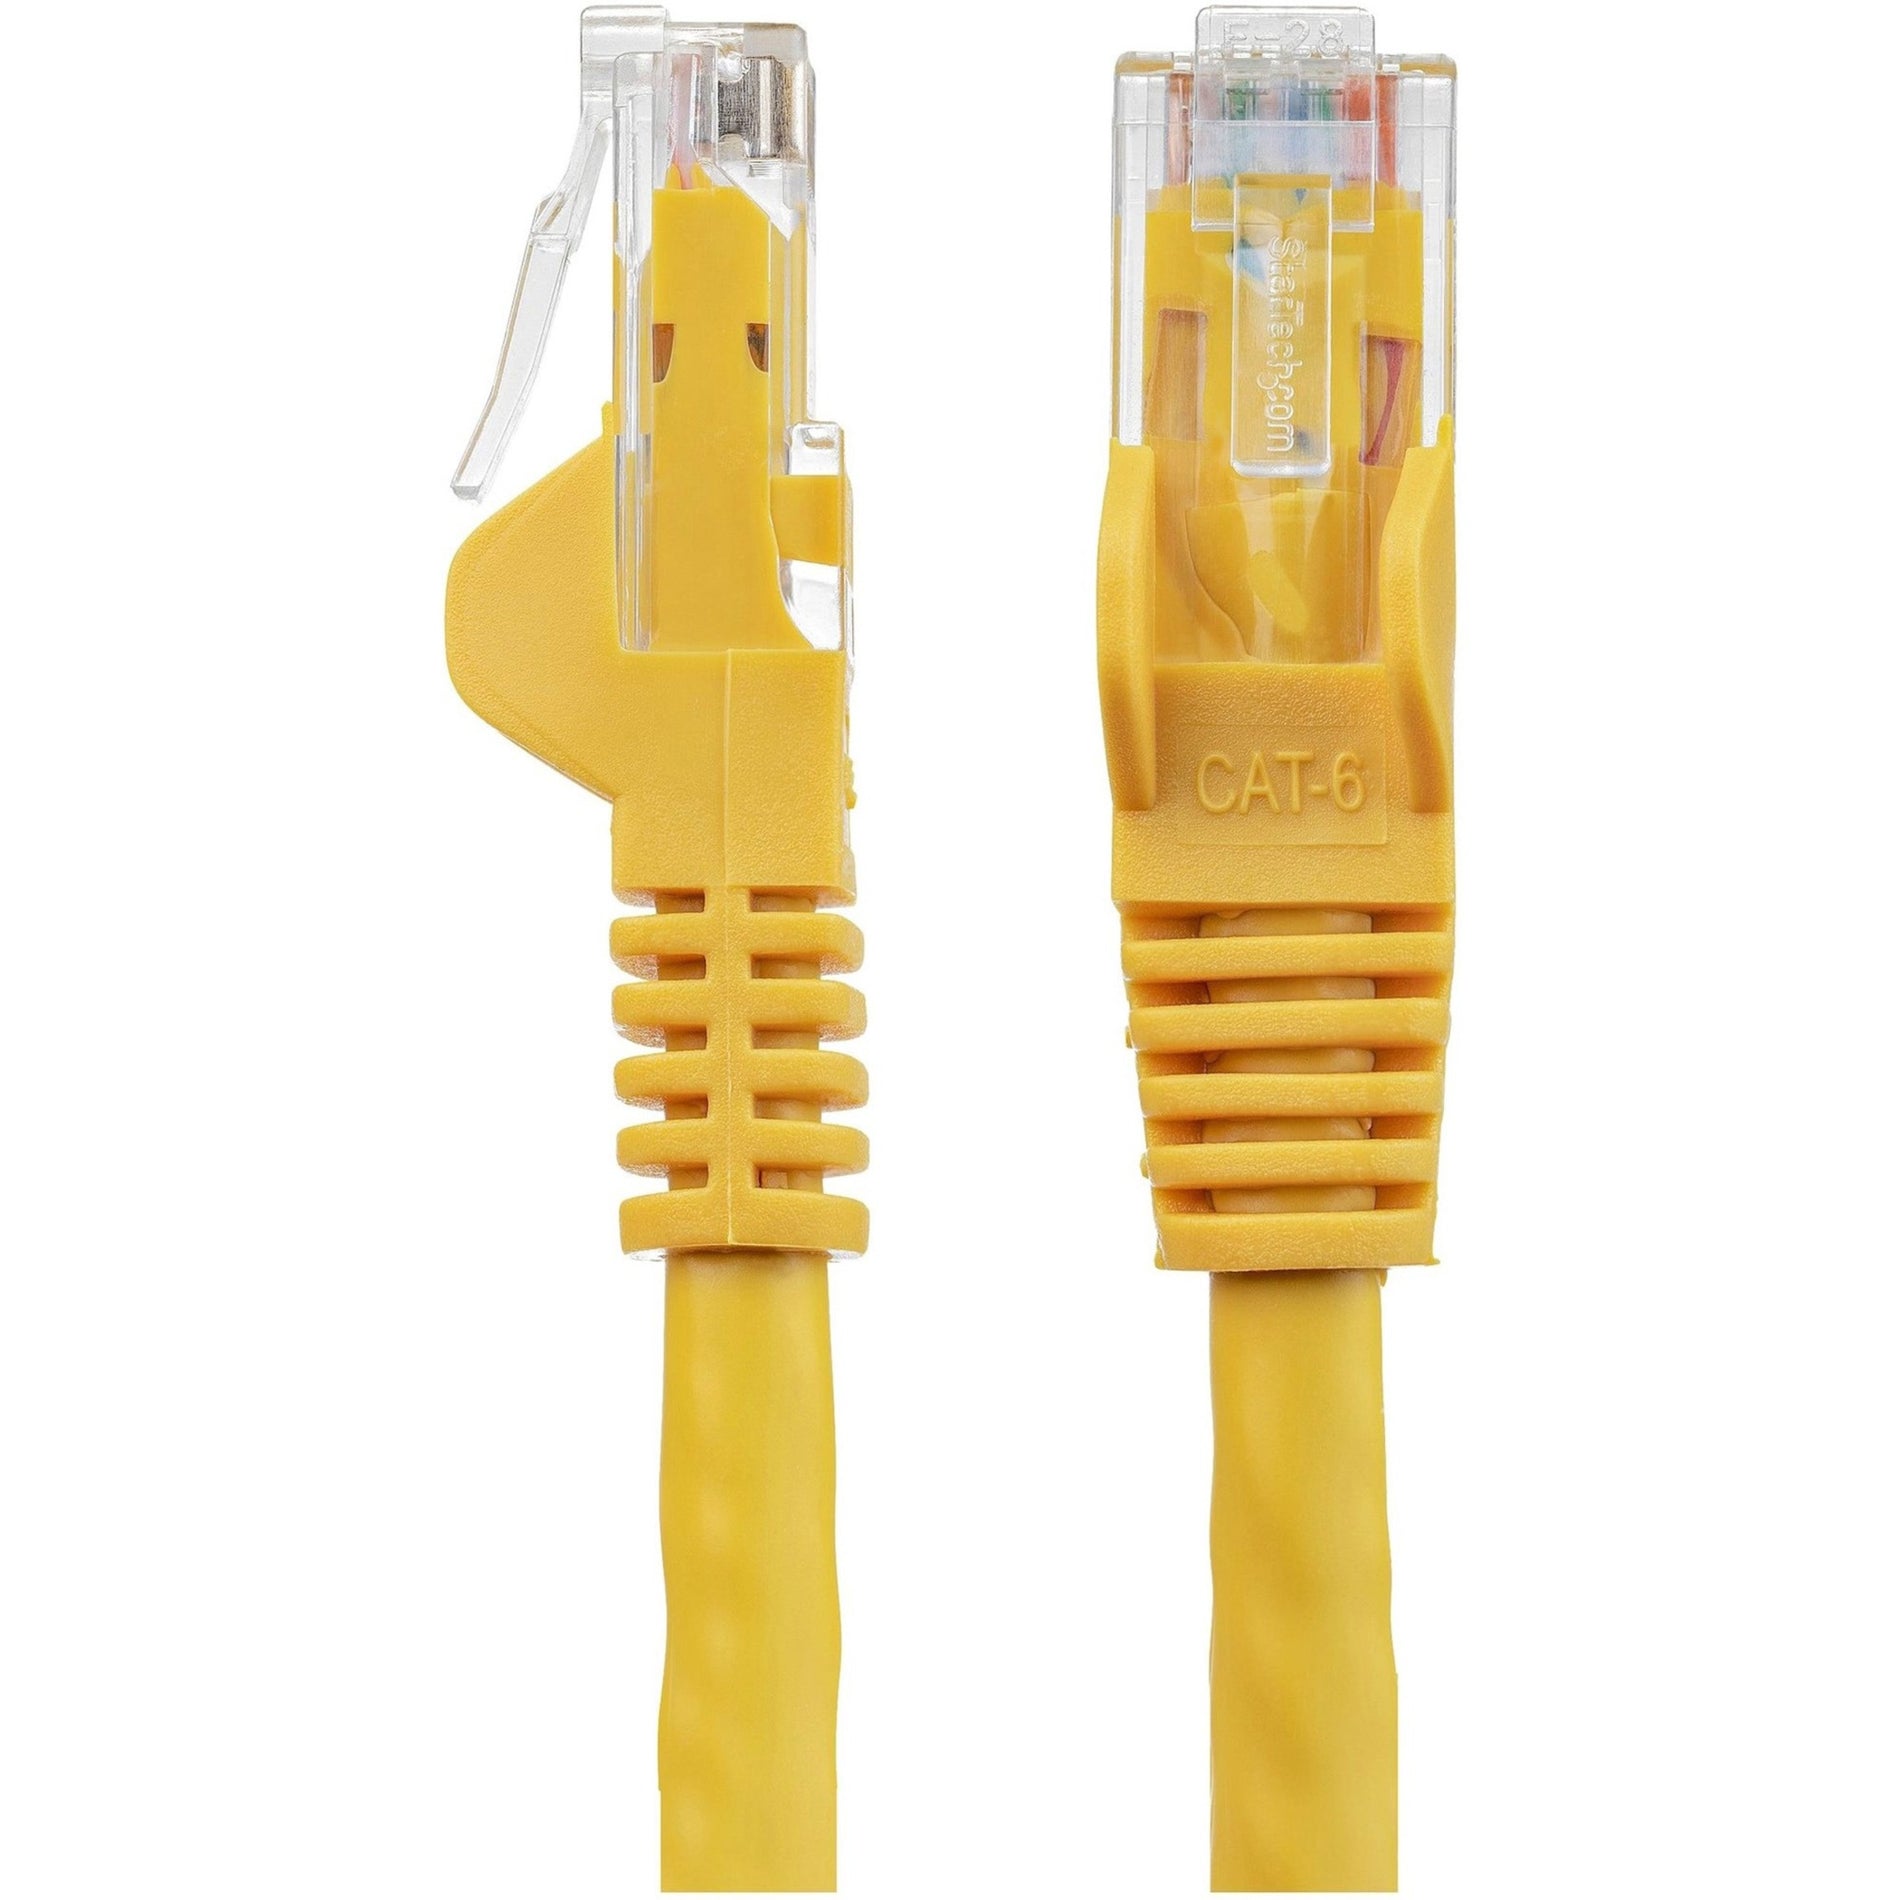 StarTech.com N6PATCH3YL 3 ft Yellow Snagless Cat6 UTP Patch Cable, Lifetime Warranty, 10 Gbit/s Data Transfer Rate, Rust Resistant